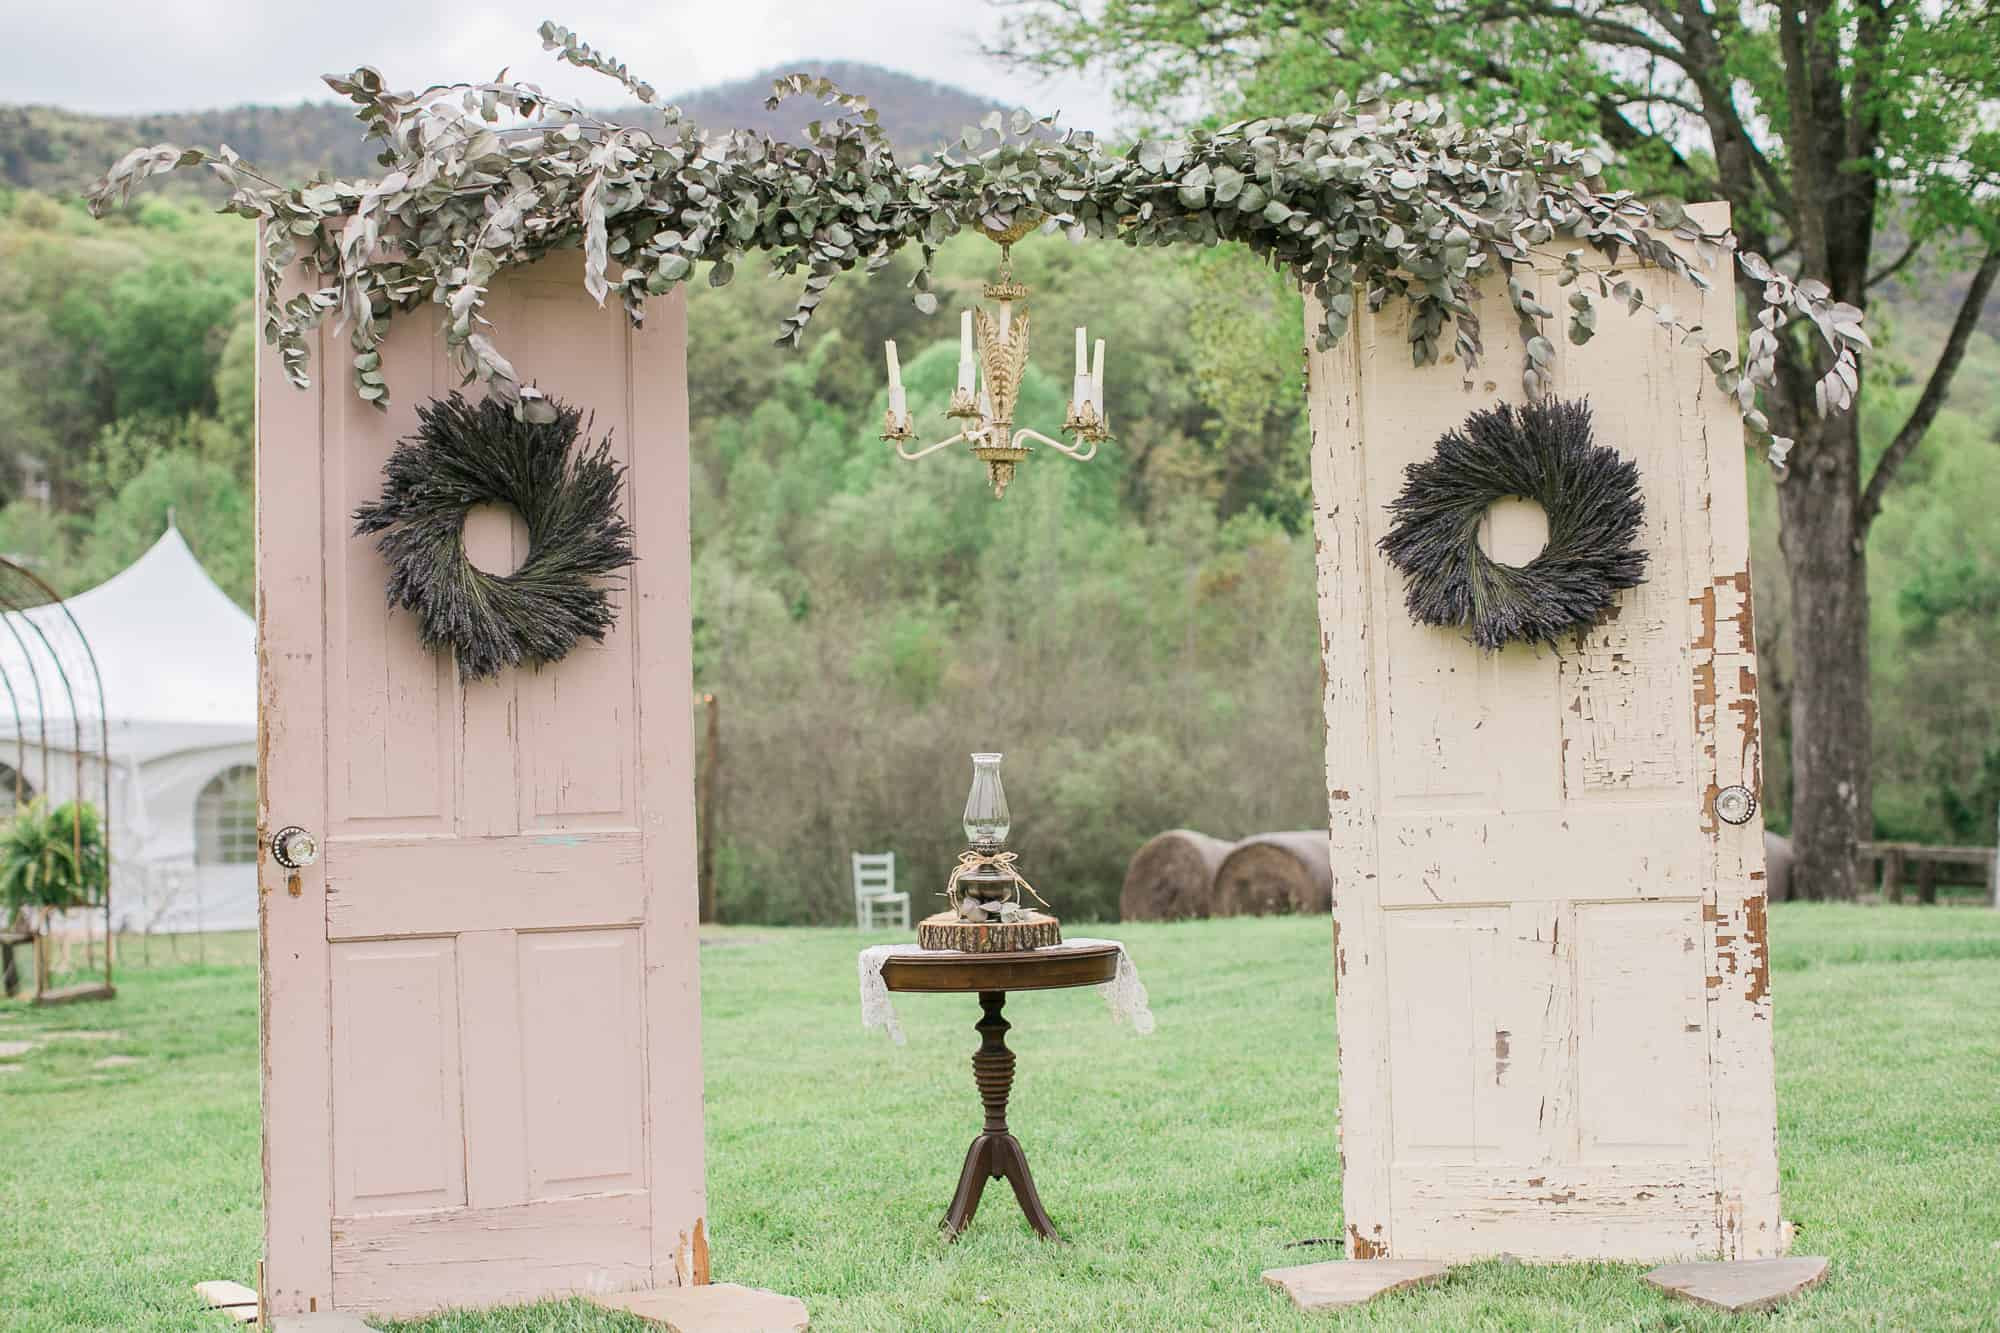 DIY Wedding Arch Wood
 15 DIY Wedding Arches To Highlight Your Ceremony With